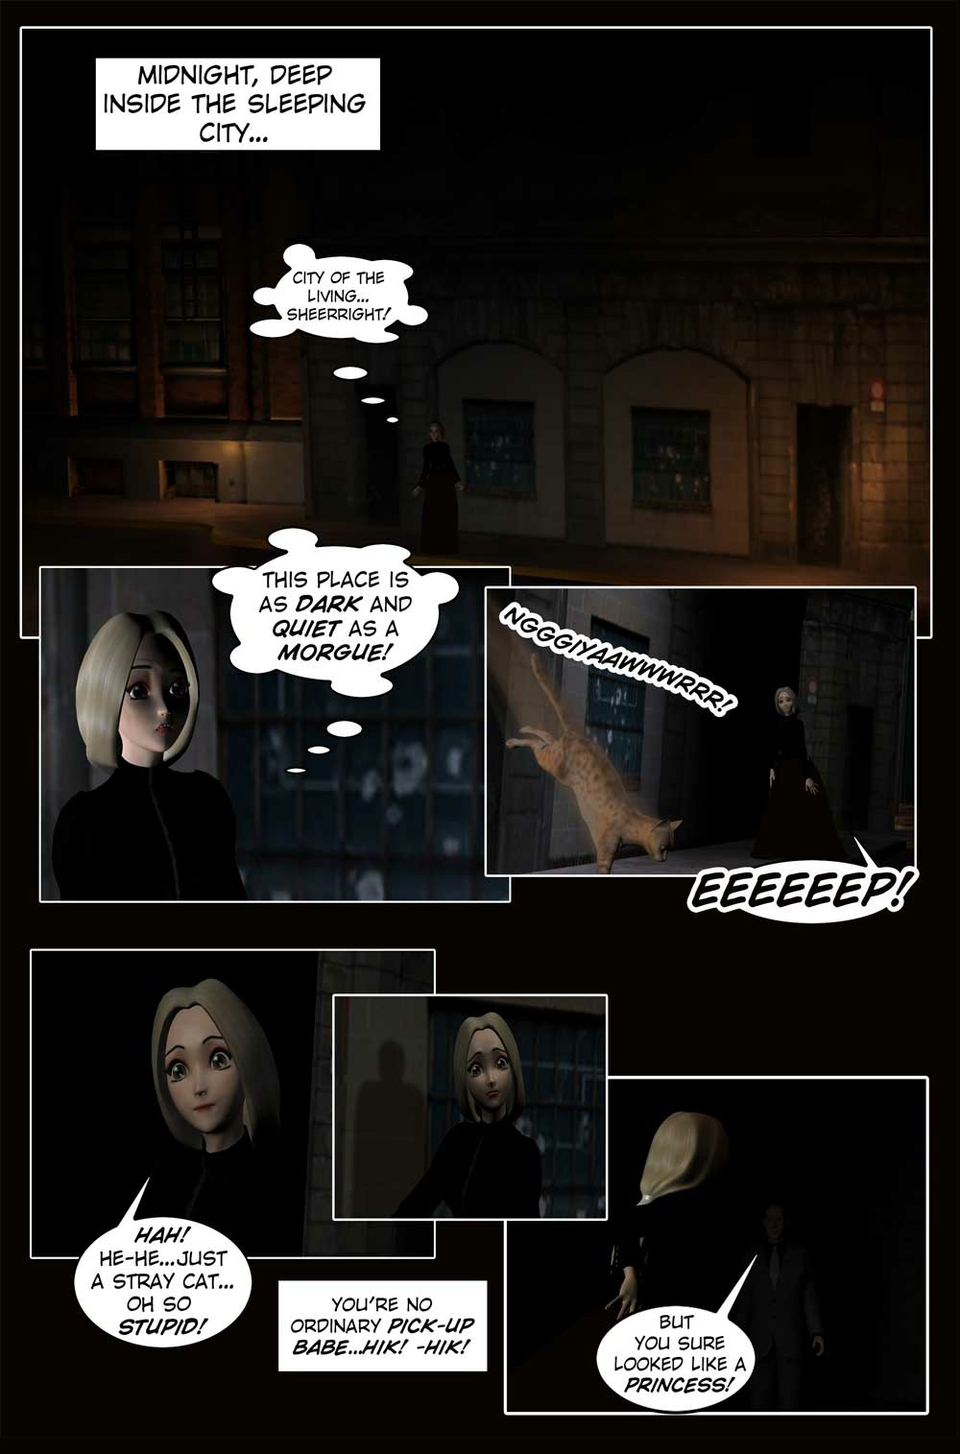 Page 29 (Danger in the Sleeping City)